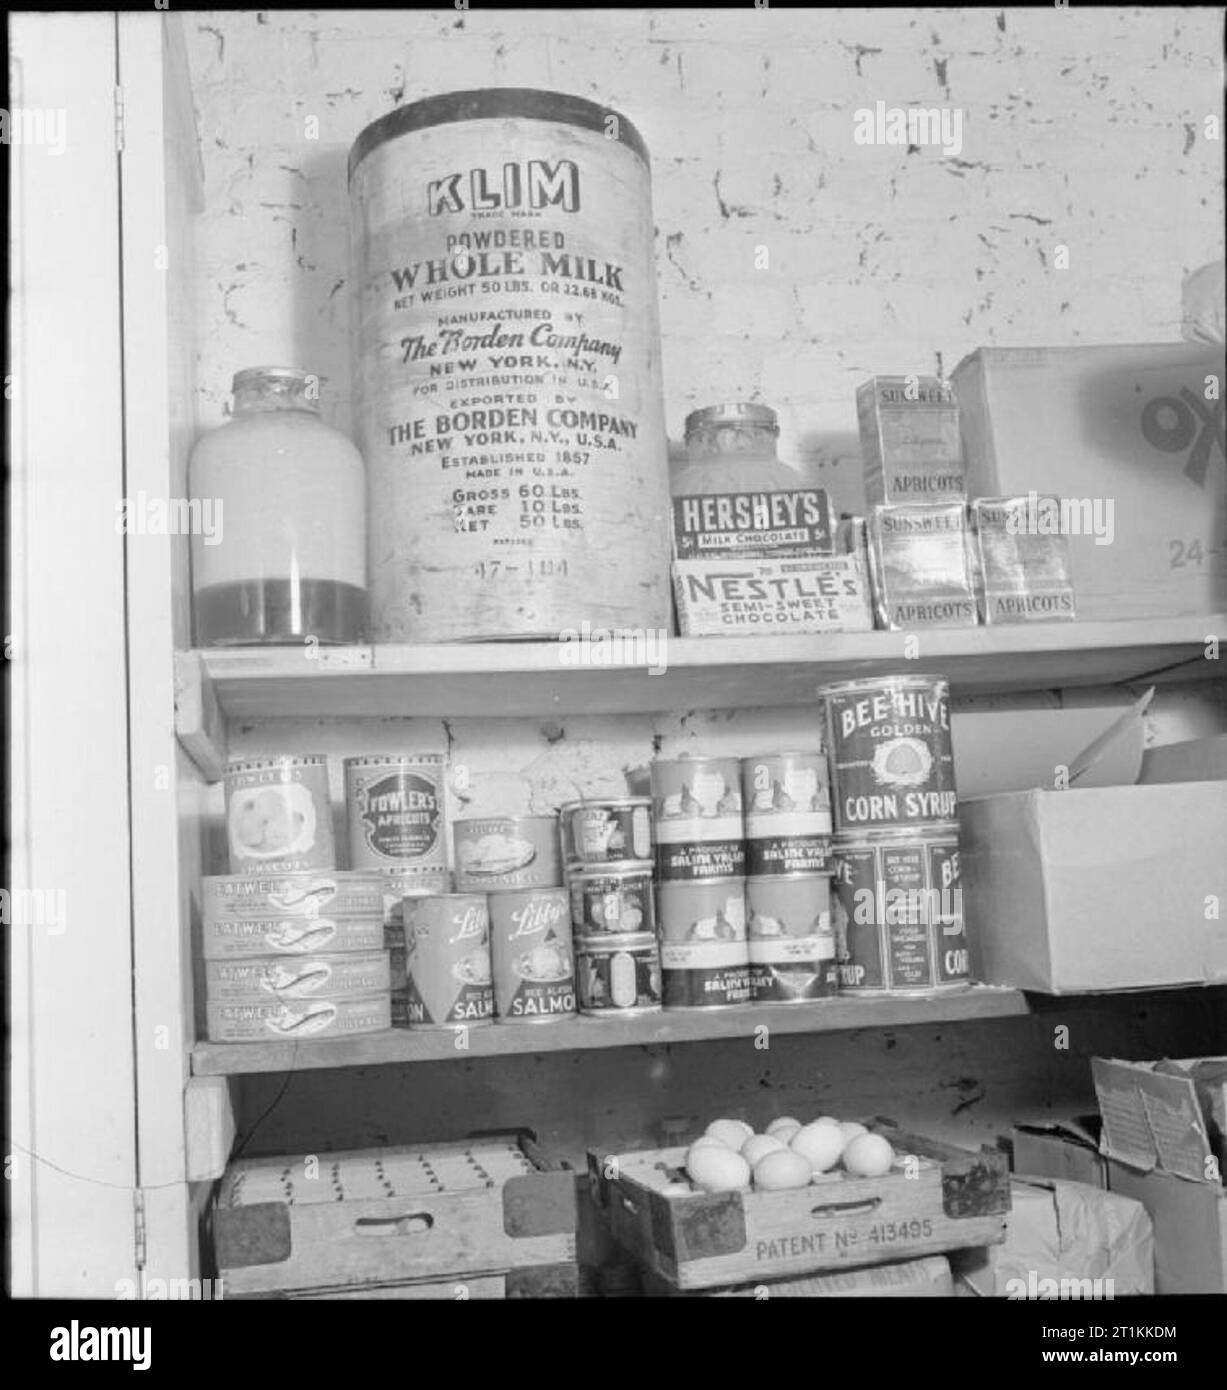 Foster Parents Plan London Nursery- Caring For Displaced Children, London, England, 1941 A corner of the larder at the 'Foster Parents Plan for War Children' nursery in Hampstead. Foods include many tinned and packed goods sent directly from the United States of America, including 'Klim' powdered milk, tinned fruit and tinned fish. Also visible on the shelves are Hershey bars and other chocolate and a good stock of fresh eggs. Stock Photo